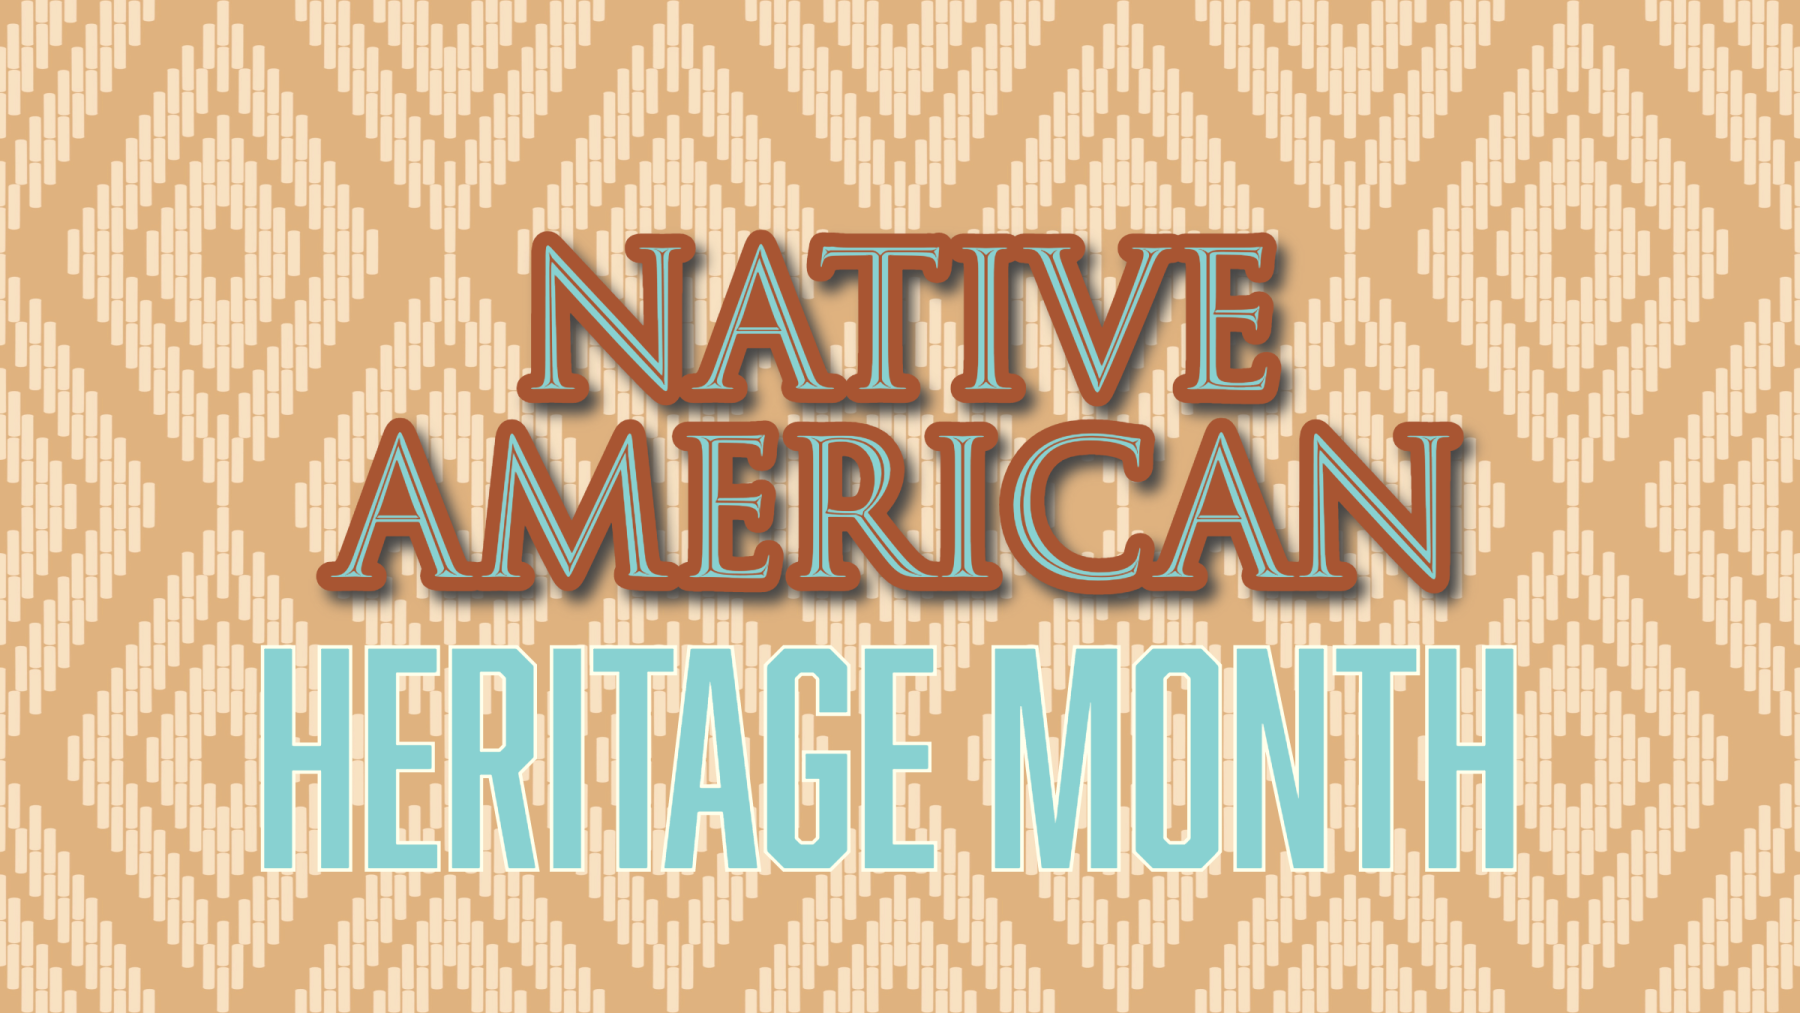 On a tan, brown woven bead background, "Native American Heritage Month" is centered. The words "Native American" appear in a teal text with brown outlining while "Heritage Month" appears in a different font of teal coloring and white outlining.